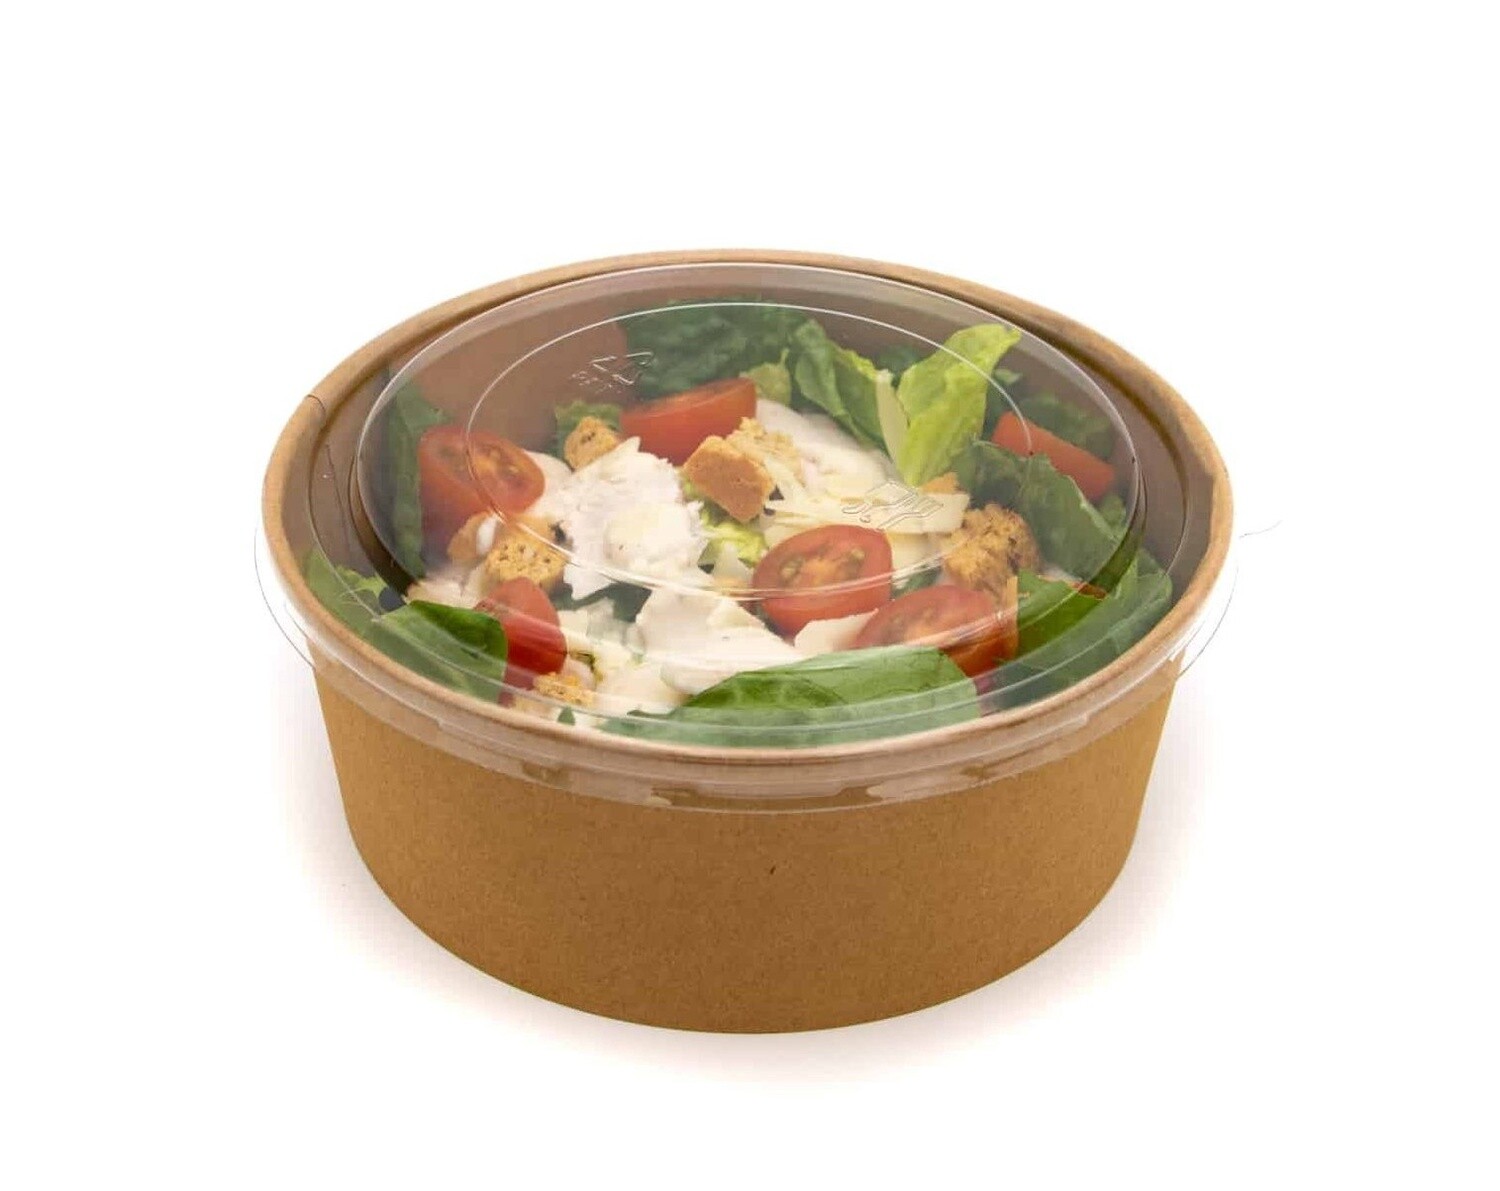 Container Round Heavyboard Kraft (Salad) Lid Clear | E